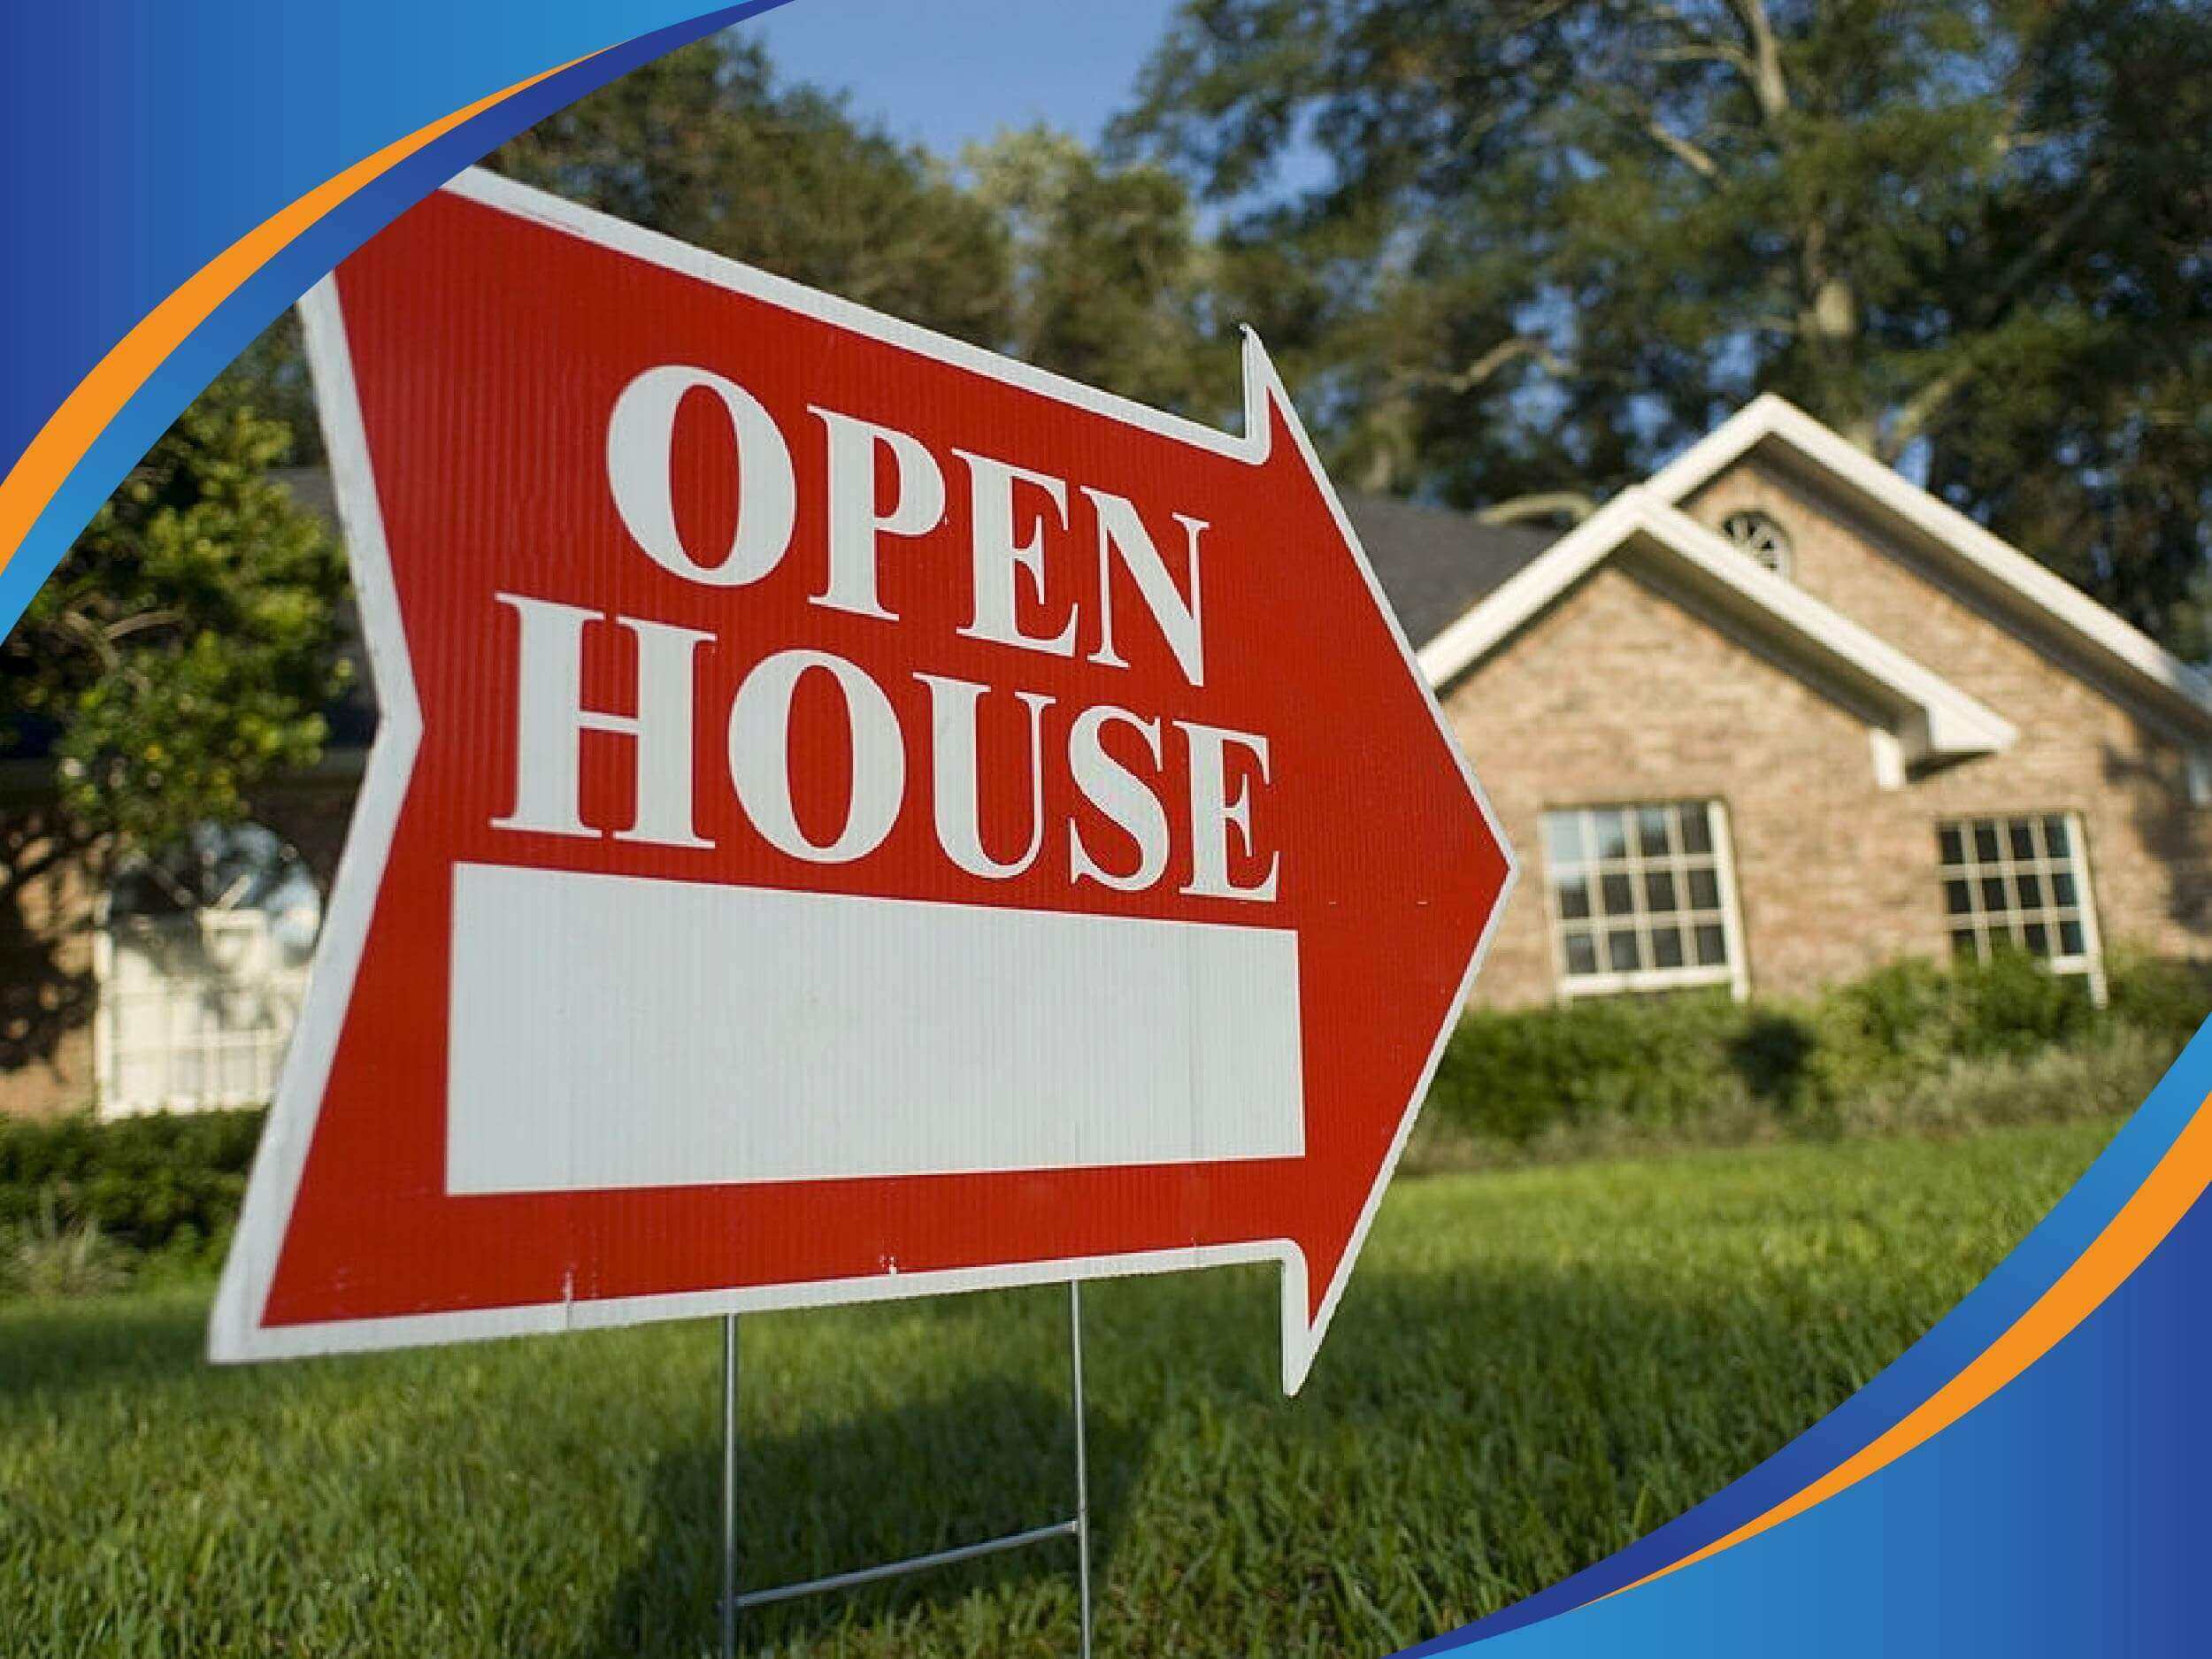 open houses and private showings – property open houses – property private showings - real estate open houses and private showings – property buying services - services – al sadat marketing services - al sadat marketing - alsadat marketing - al-sadat marketing - real estate agency - property portal - islamabad - rawalpindi - pakistan